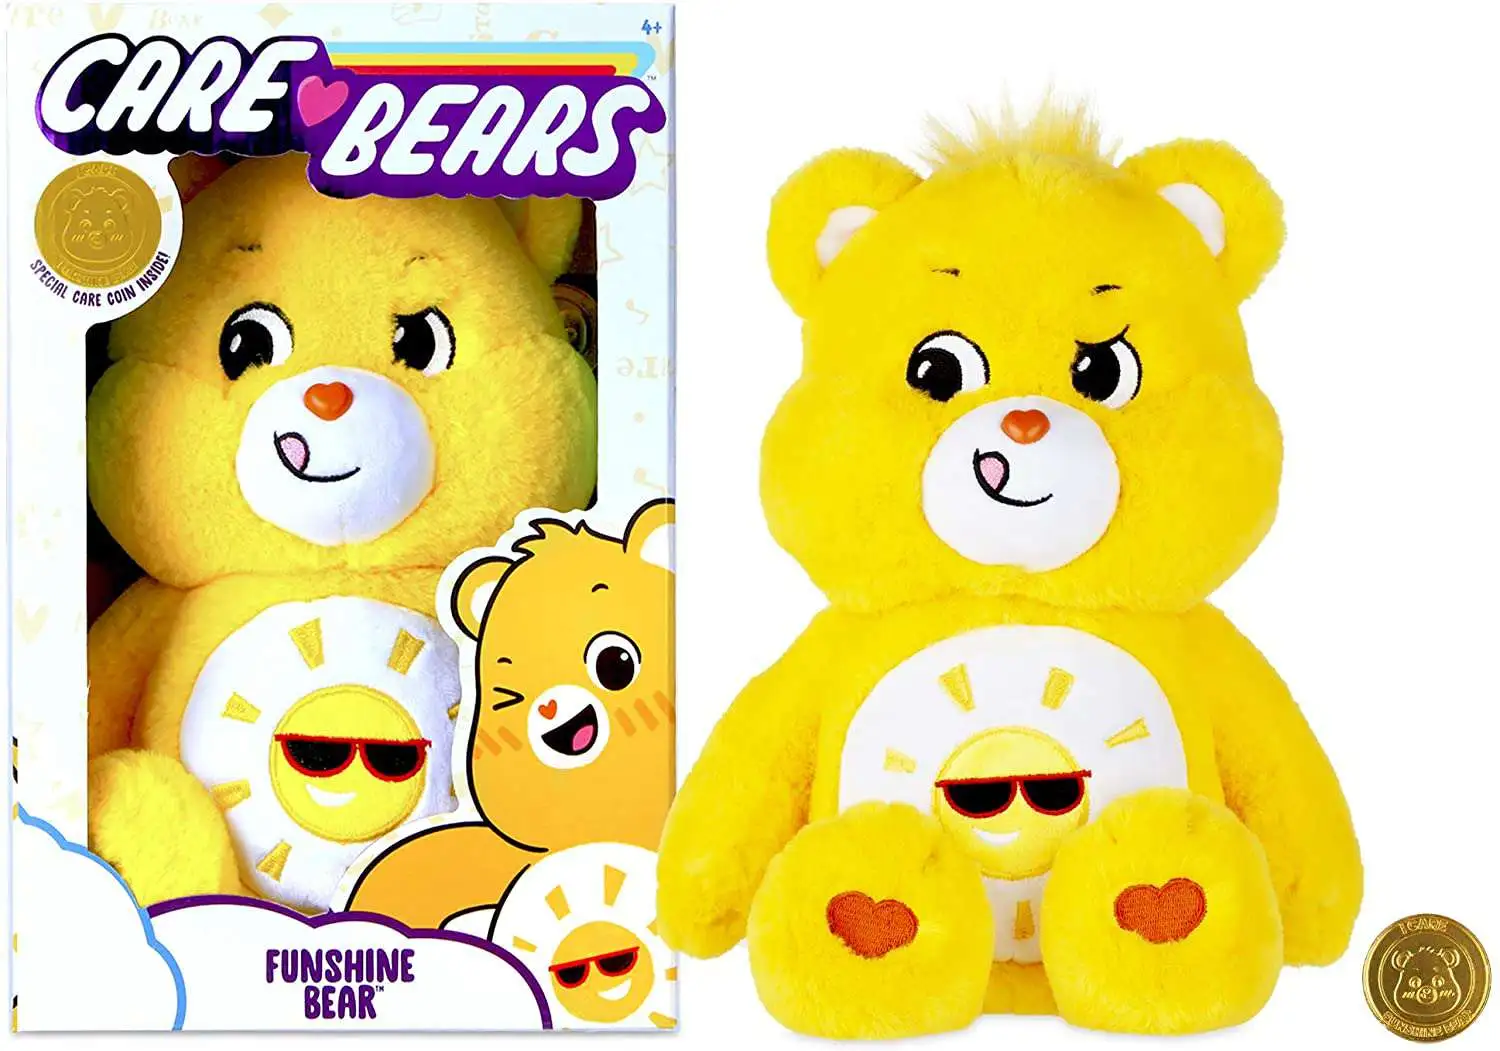 Care Bears Funshine Bear 14-Inch Plush with Collectible Coin